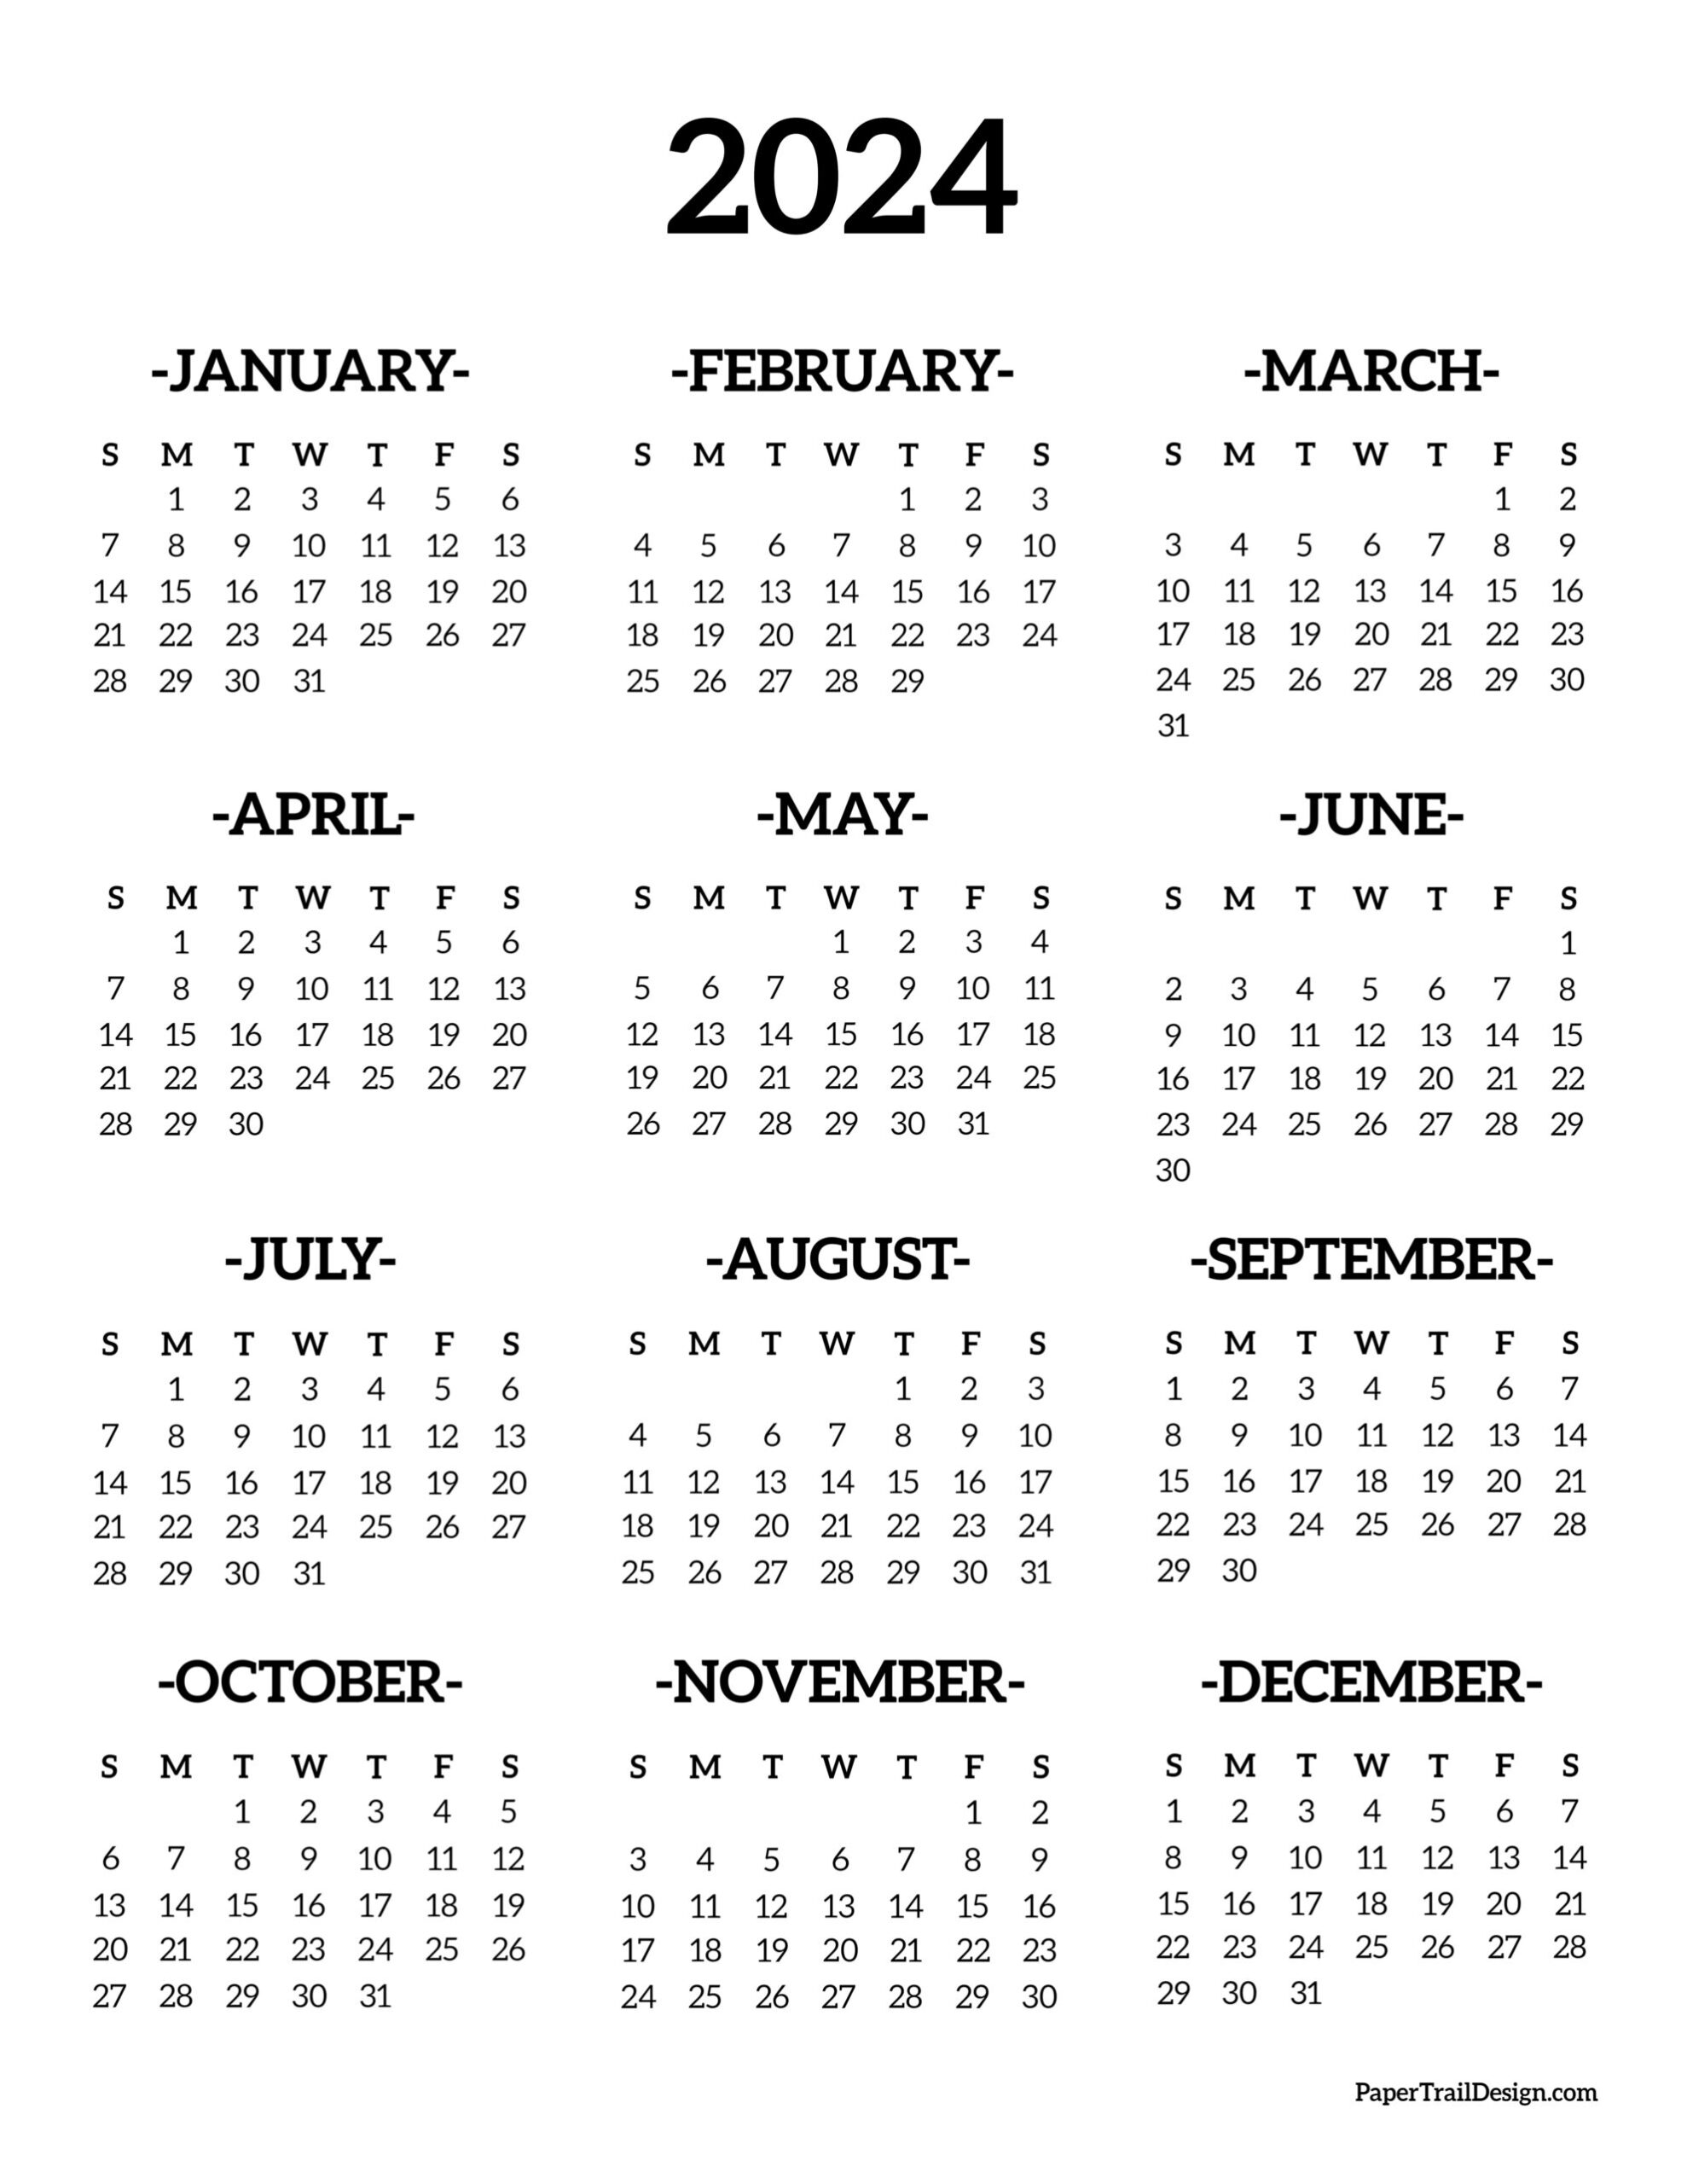 Calendar 2024 Printable One Page - Paper Trail Design for Printable Calendar Yearly 2024